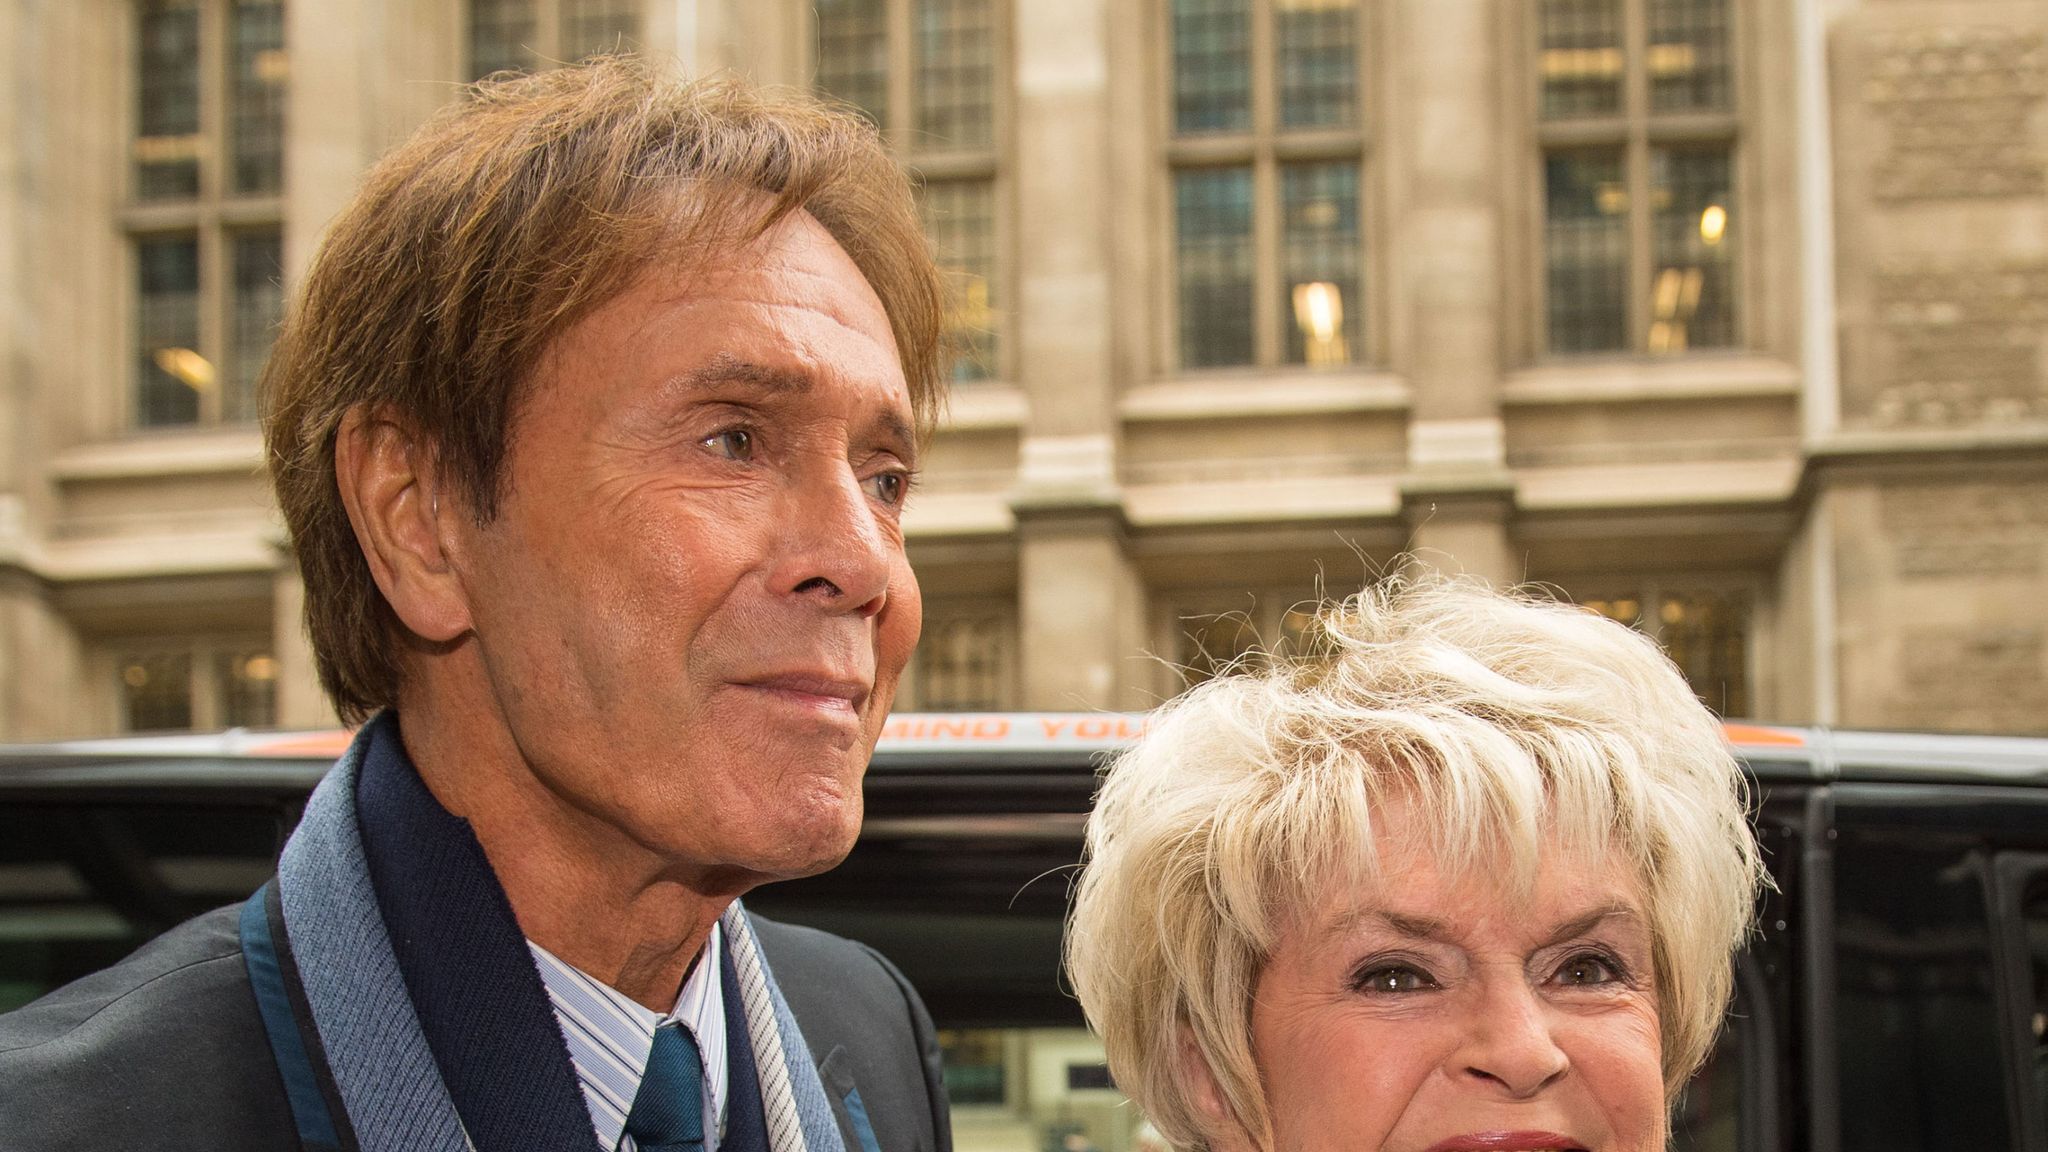 Sir Cliff Richard breaks down in tears as he gives evidence during 2048x1152